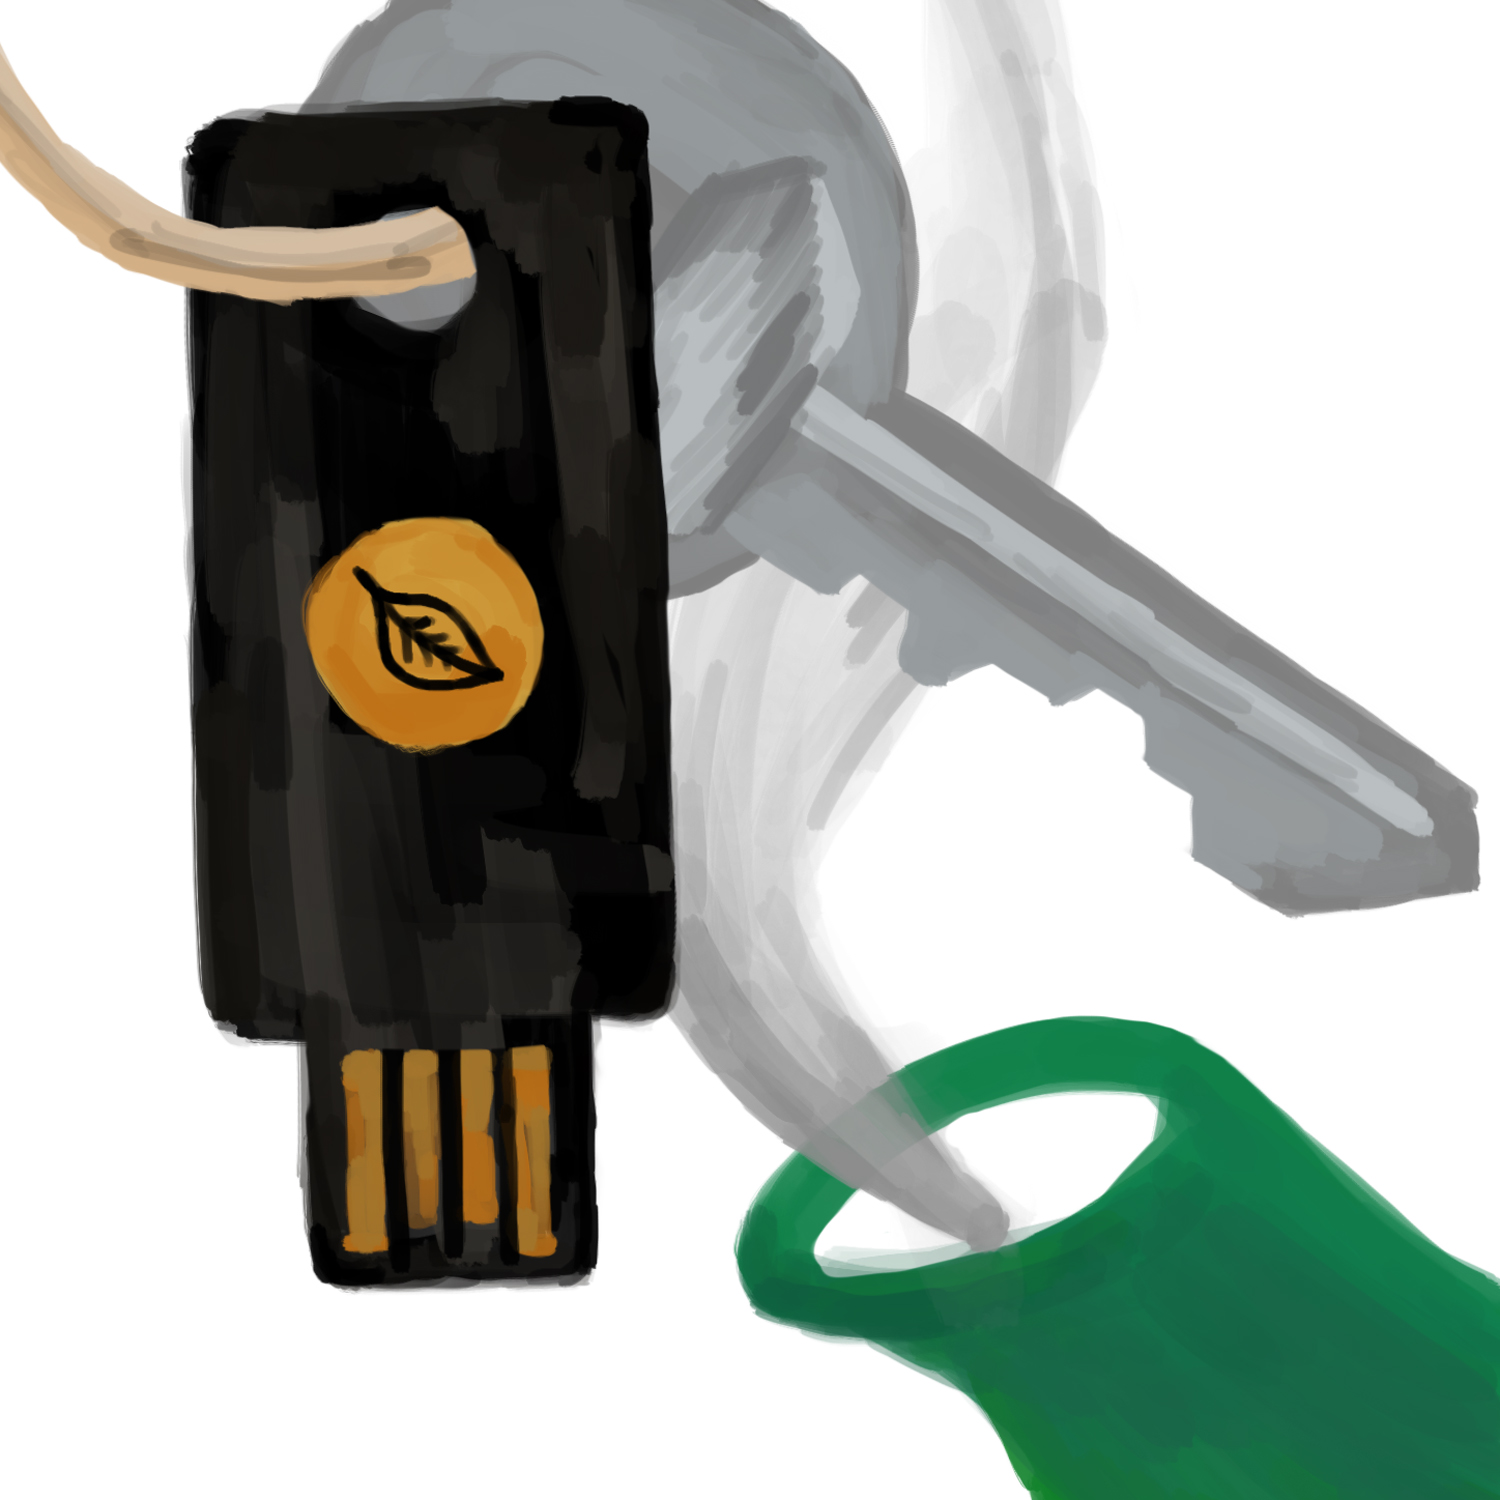 A drawing of a security key on a keychain, with a teapot spout behind it.